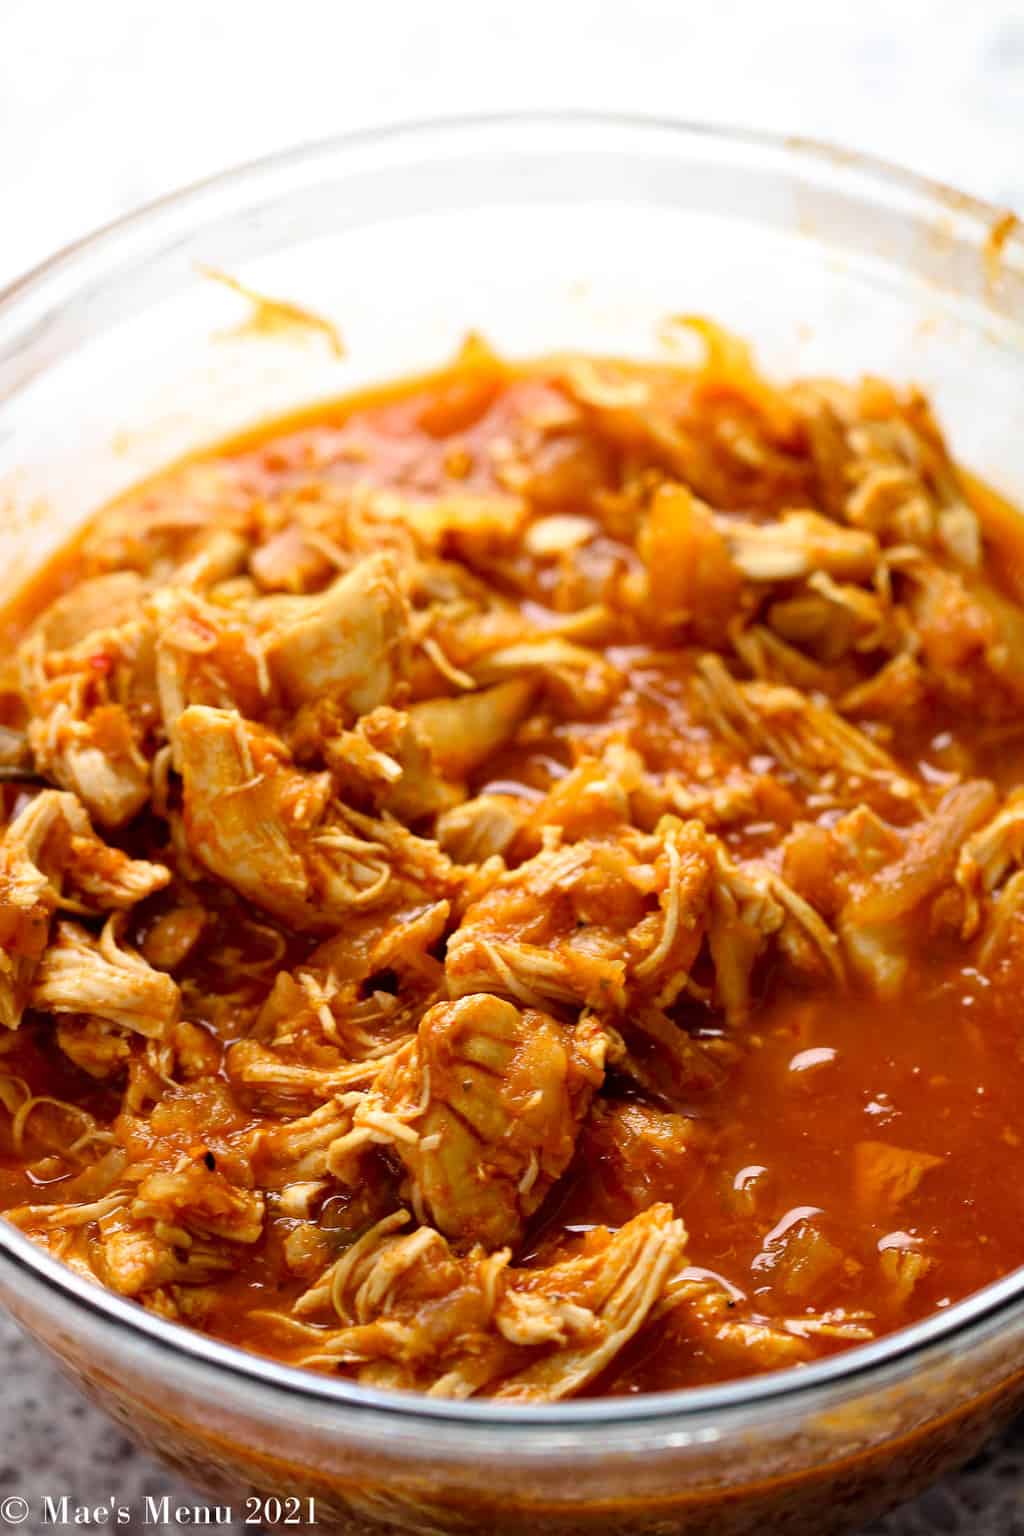 An up-close side shot of the instant pot shredded chicken in a clear mixing bowl